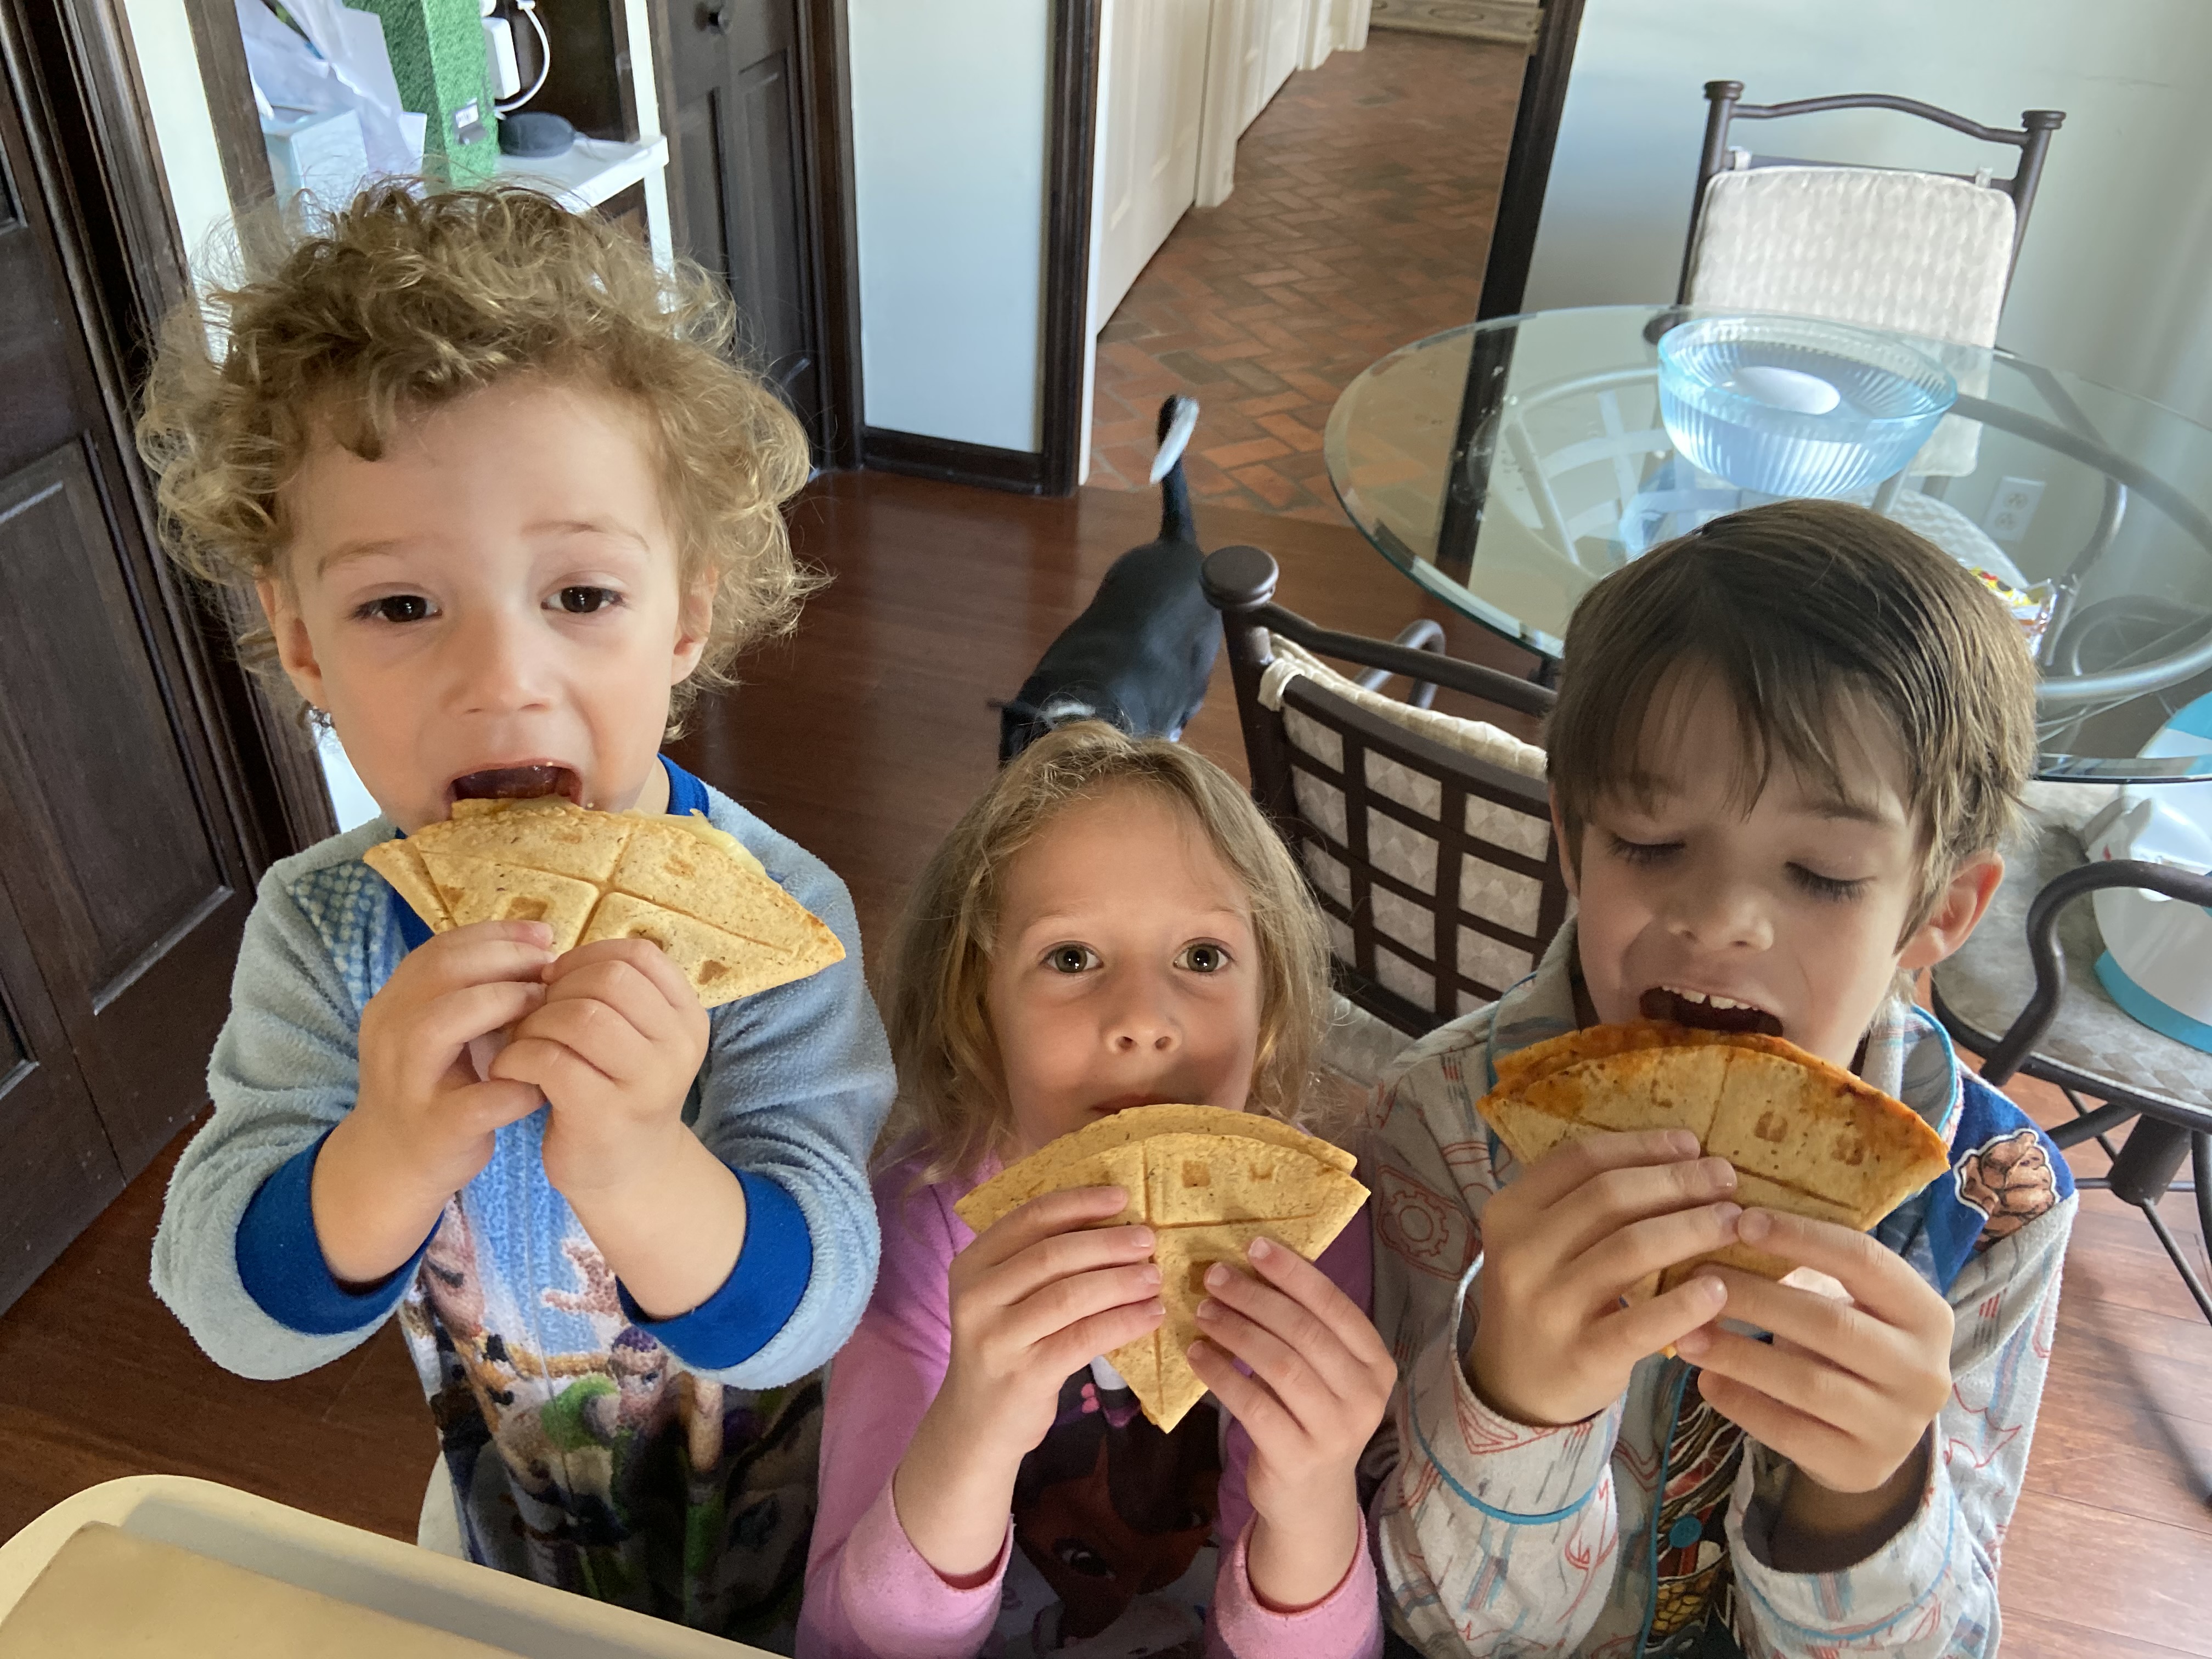 KID CREPES: SIMPLE PORTABLE MEALS AND SNACKS FOR KIDS